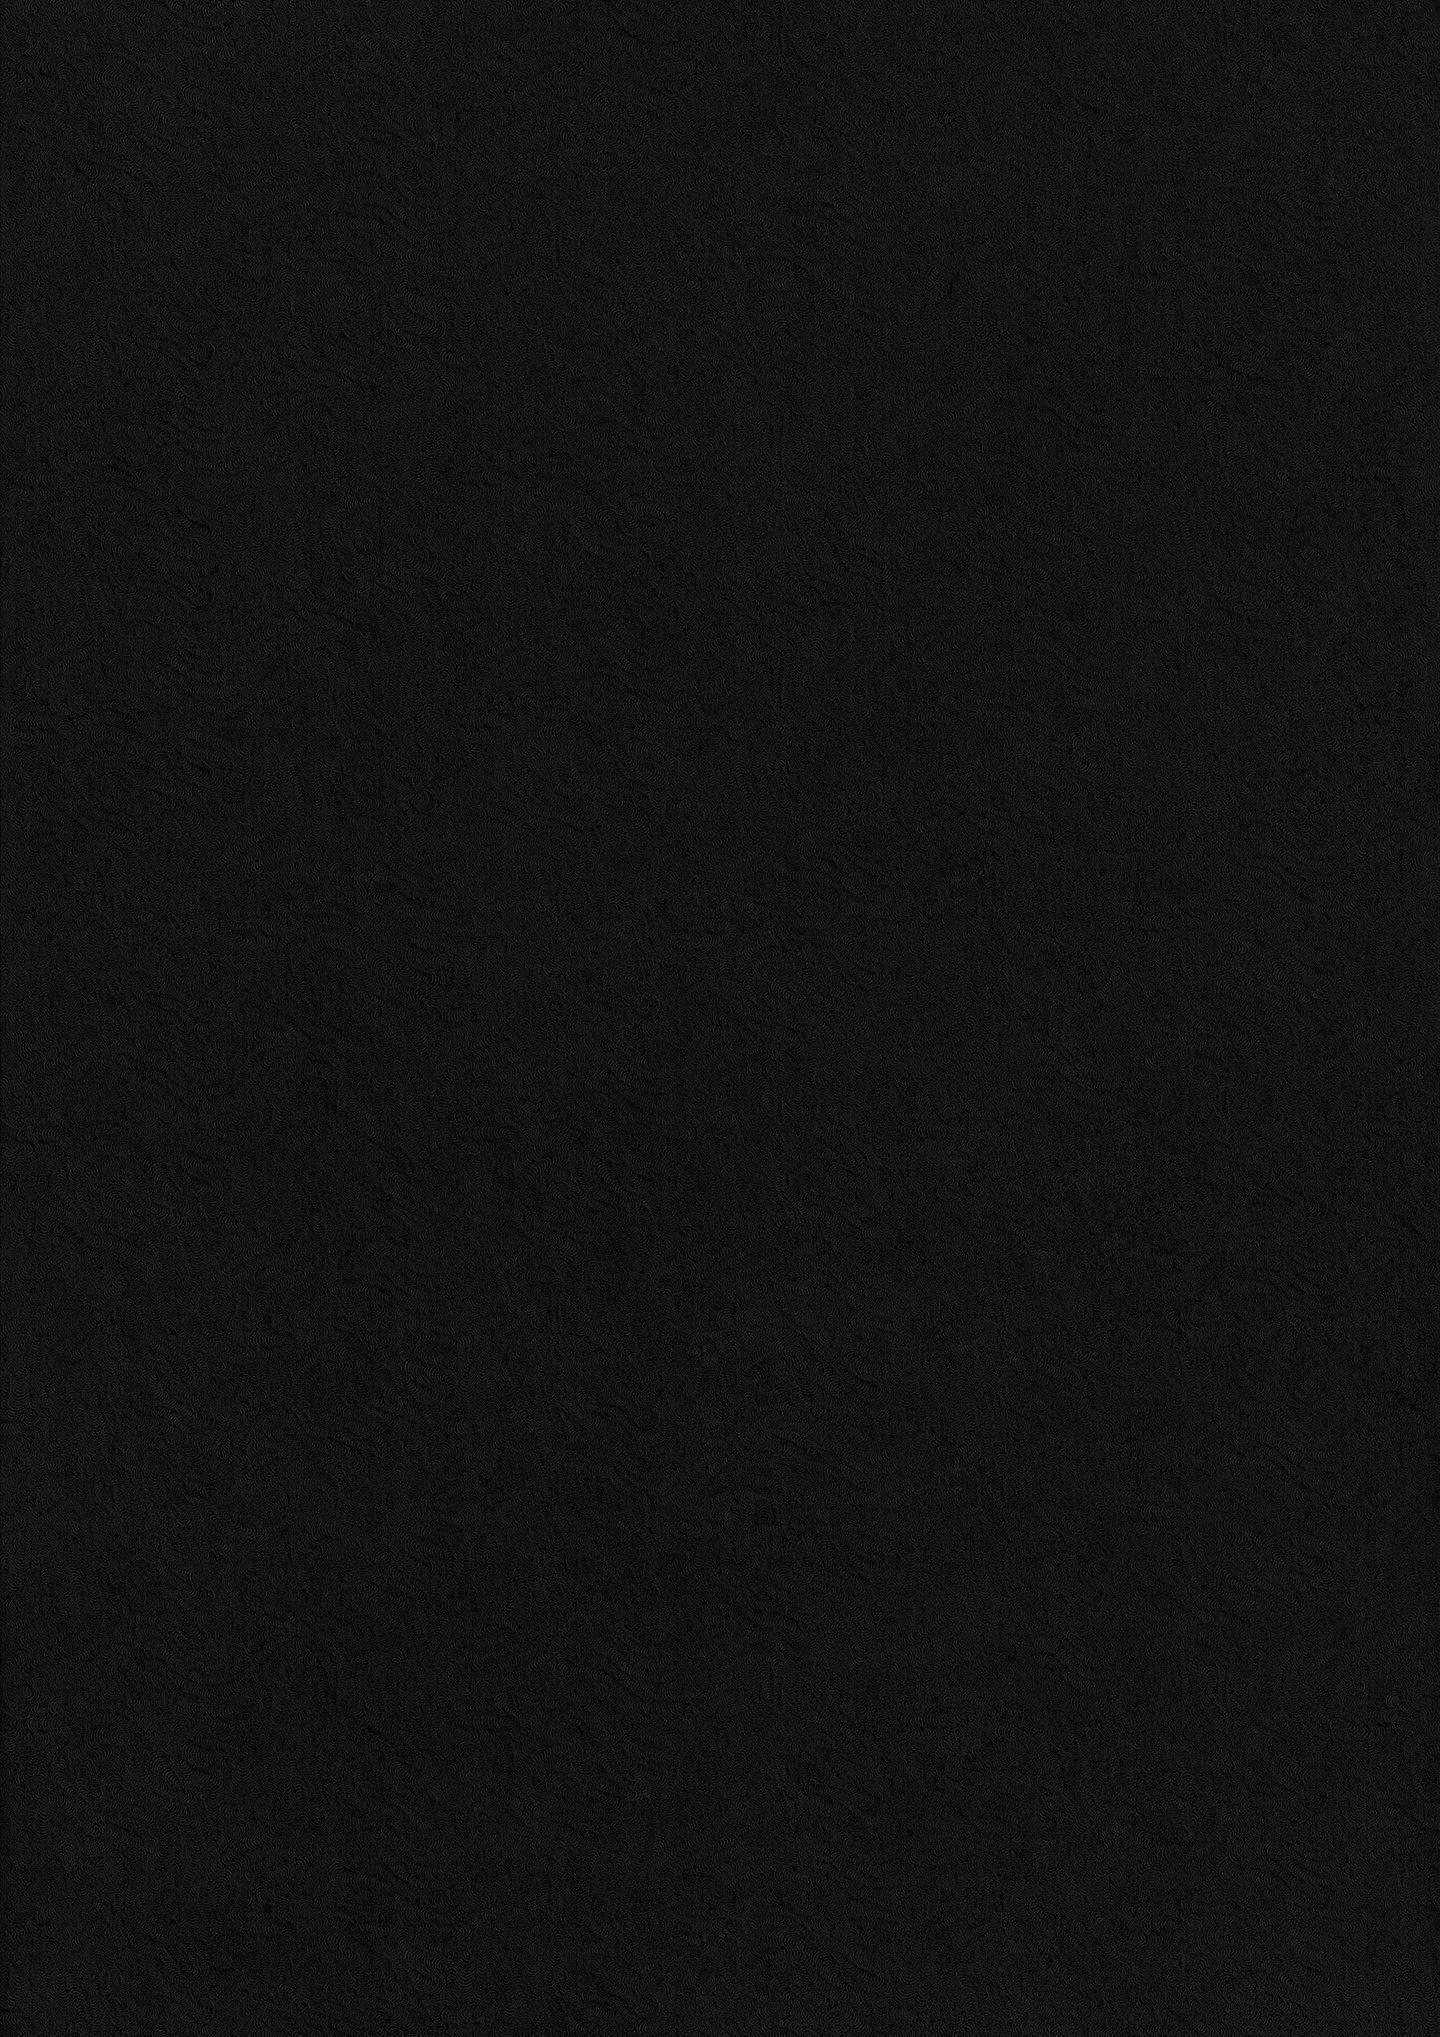 26 Black Paper Texture Backgrounds preview image.